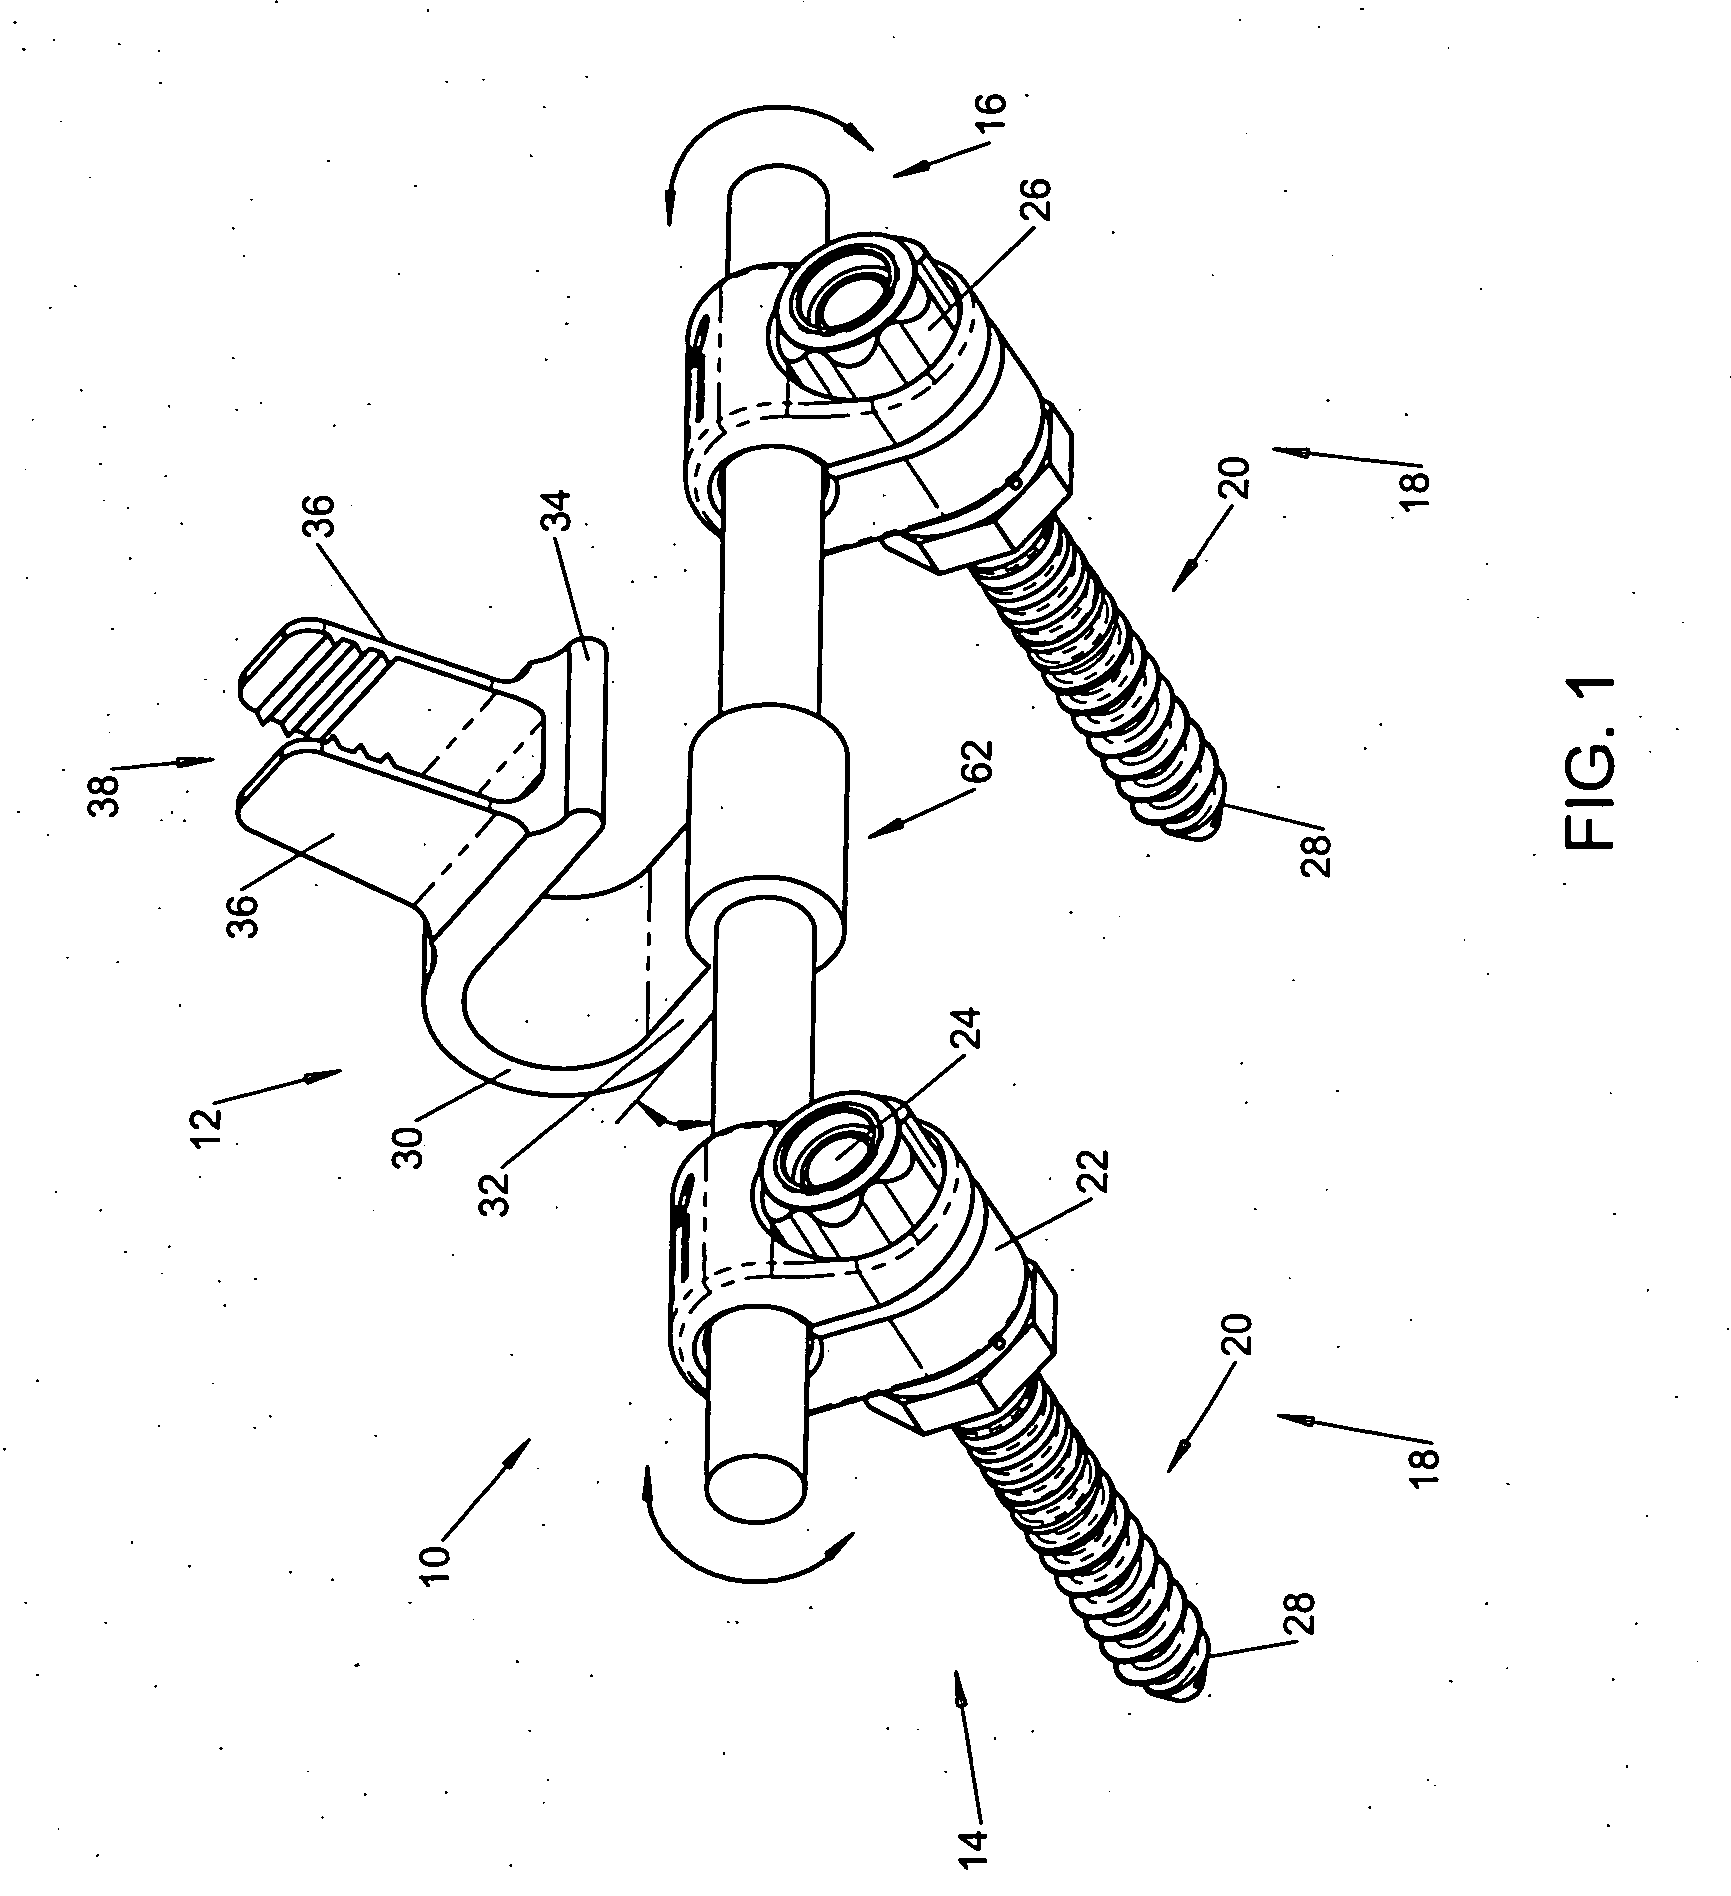 Interspinous vertebral and lumbosacral stabilization devices and methods of use